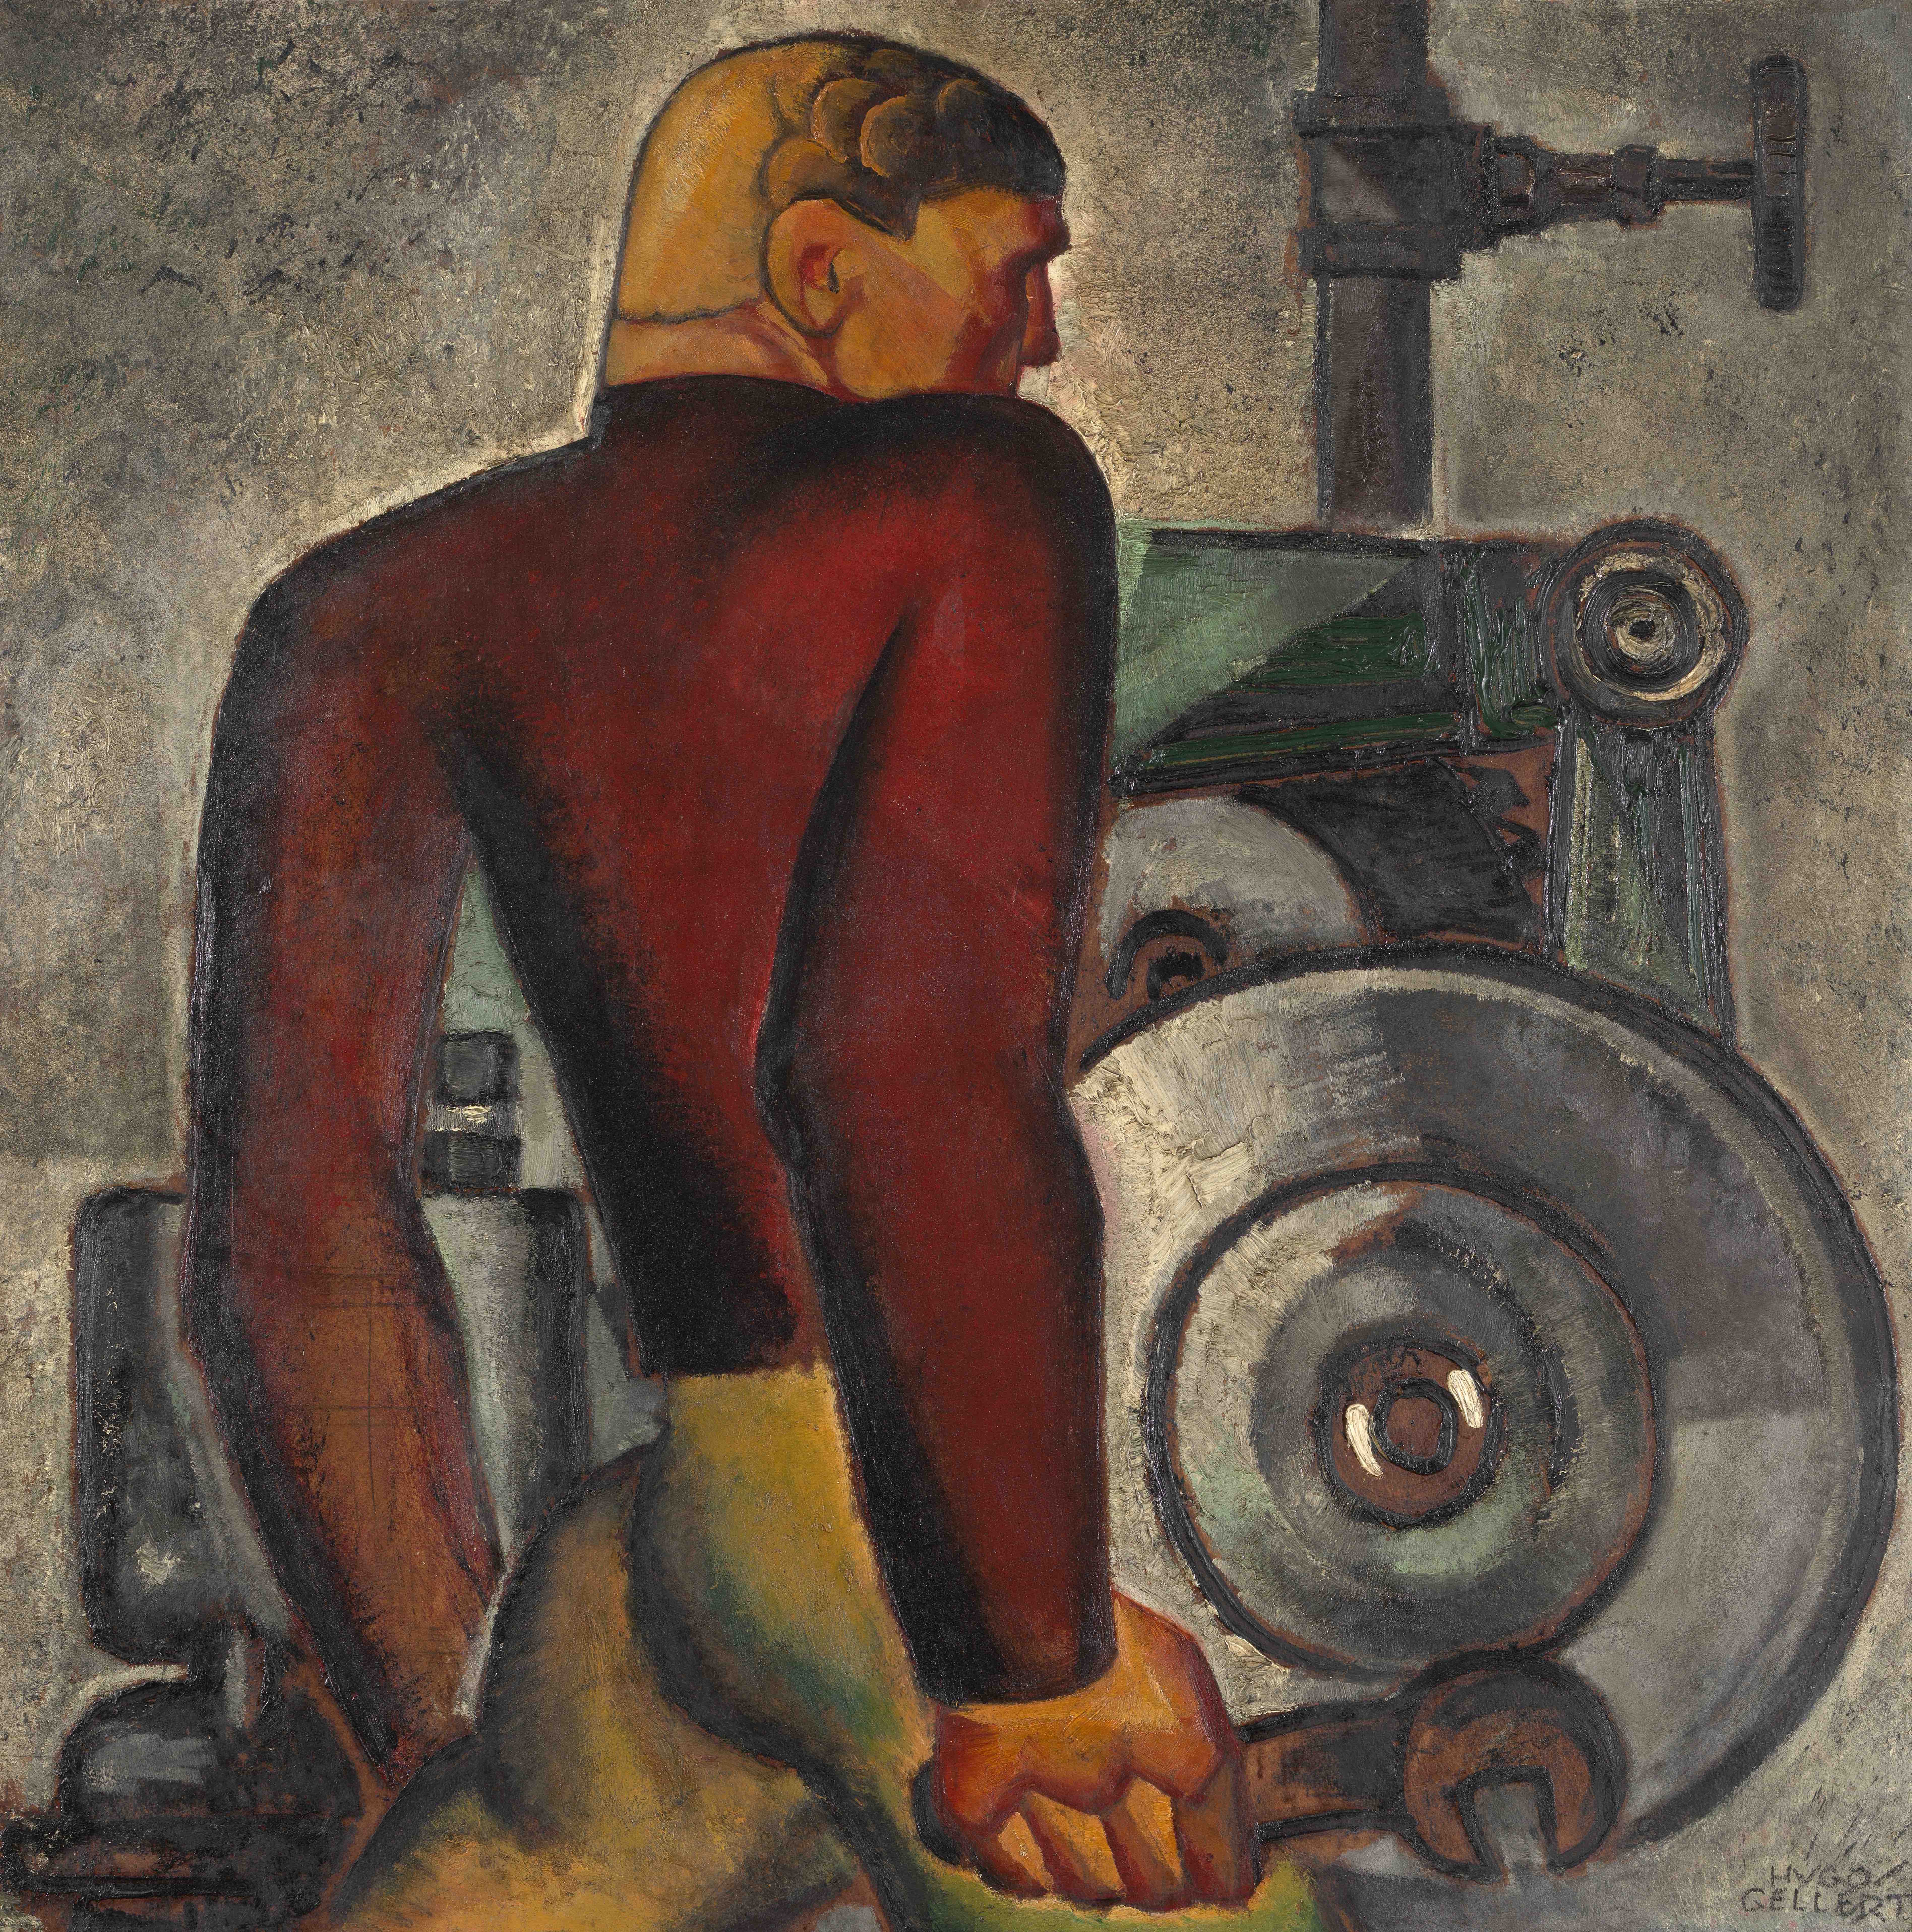 Worker and Machine, 1928. Oil on panel, 30" x 31". From the collection of Sandra and Bram Dijkstra.© Hugo Gellert; Courtesy of Mary Ryan Gallery. New York.